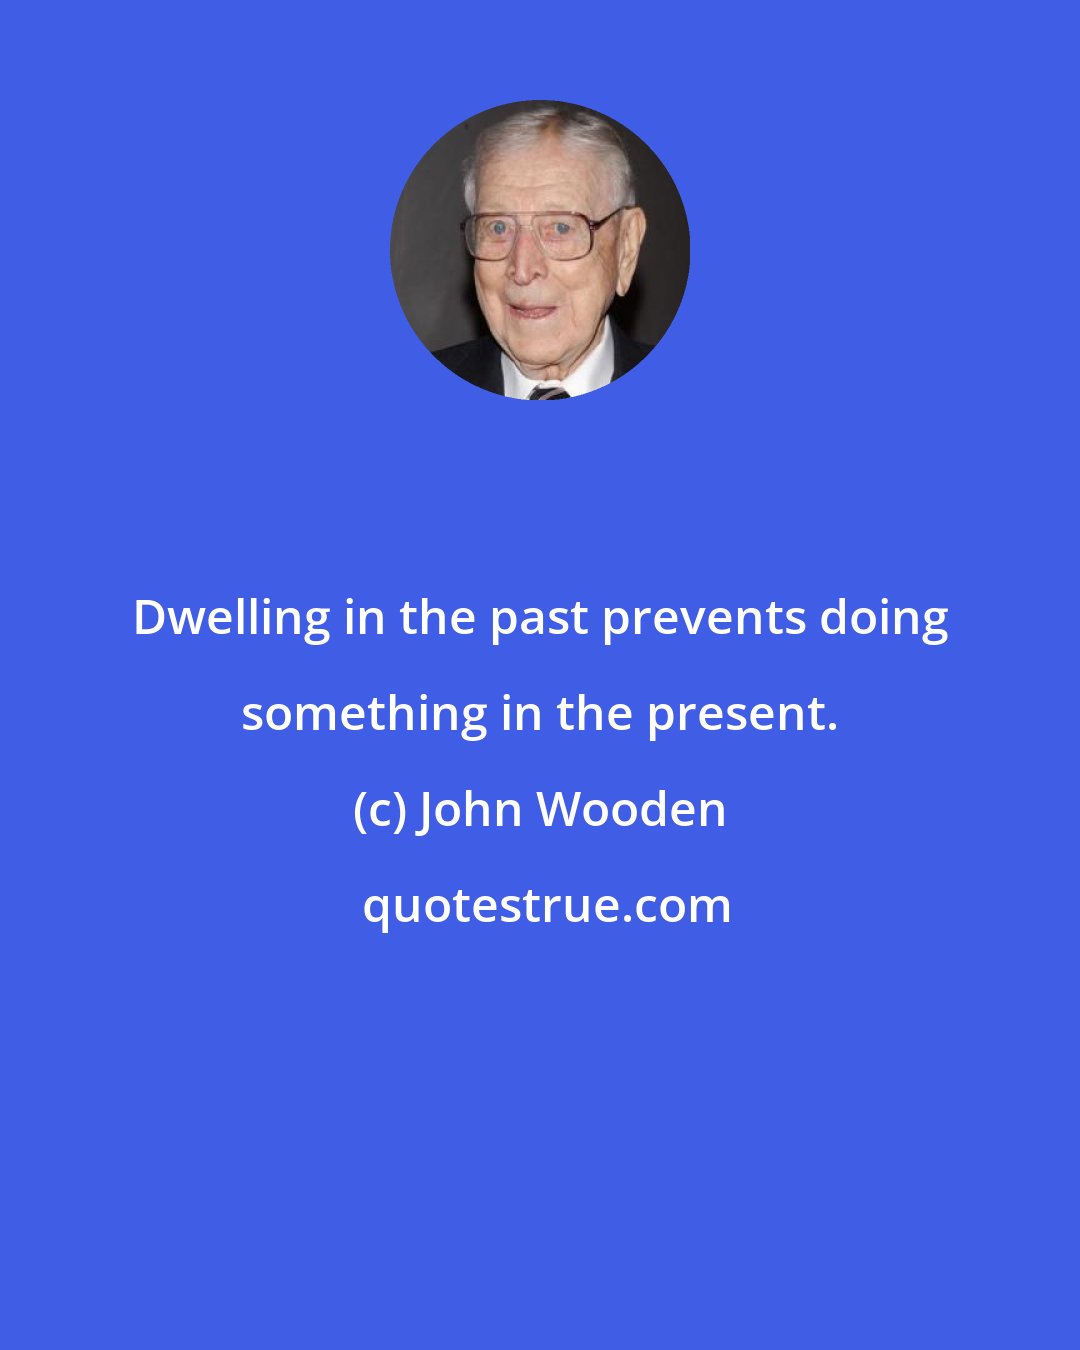 John Wooden: Dwelling in the past prevents doing something in the present.